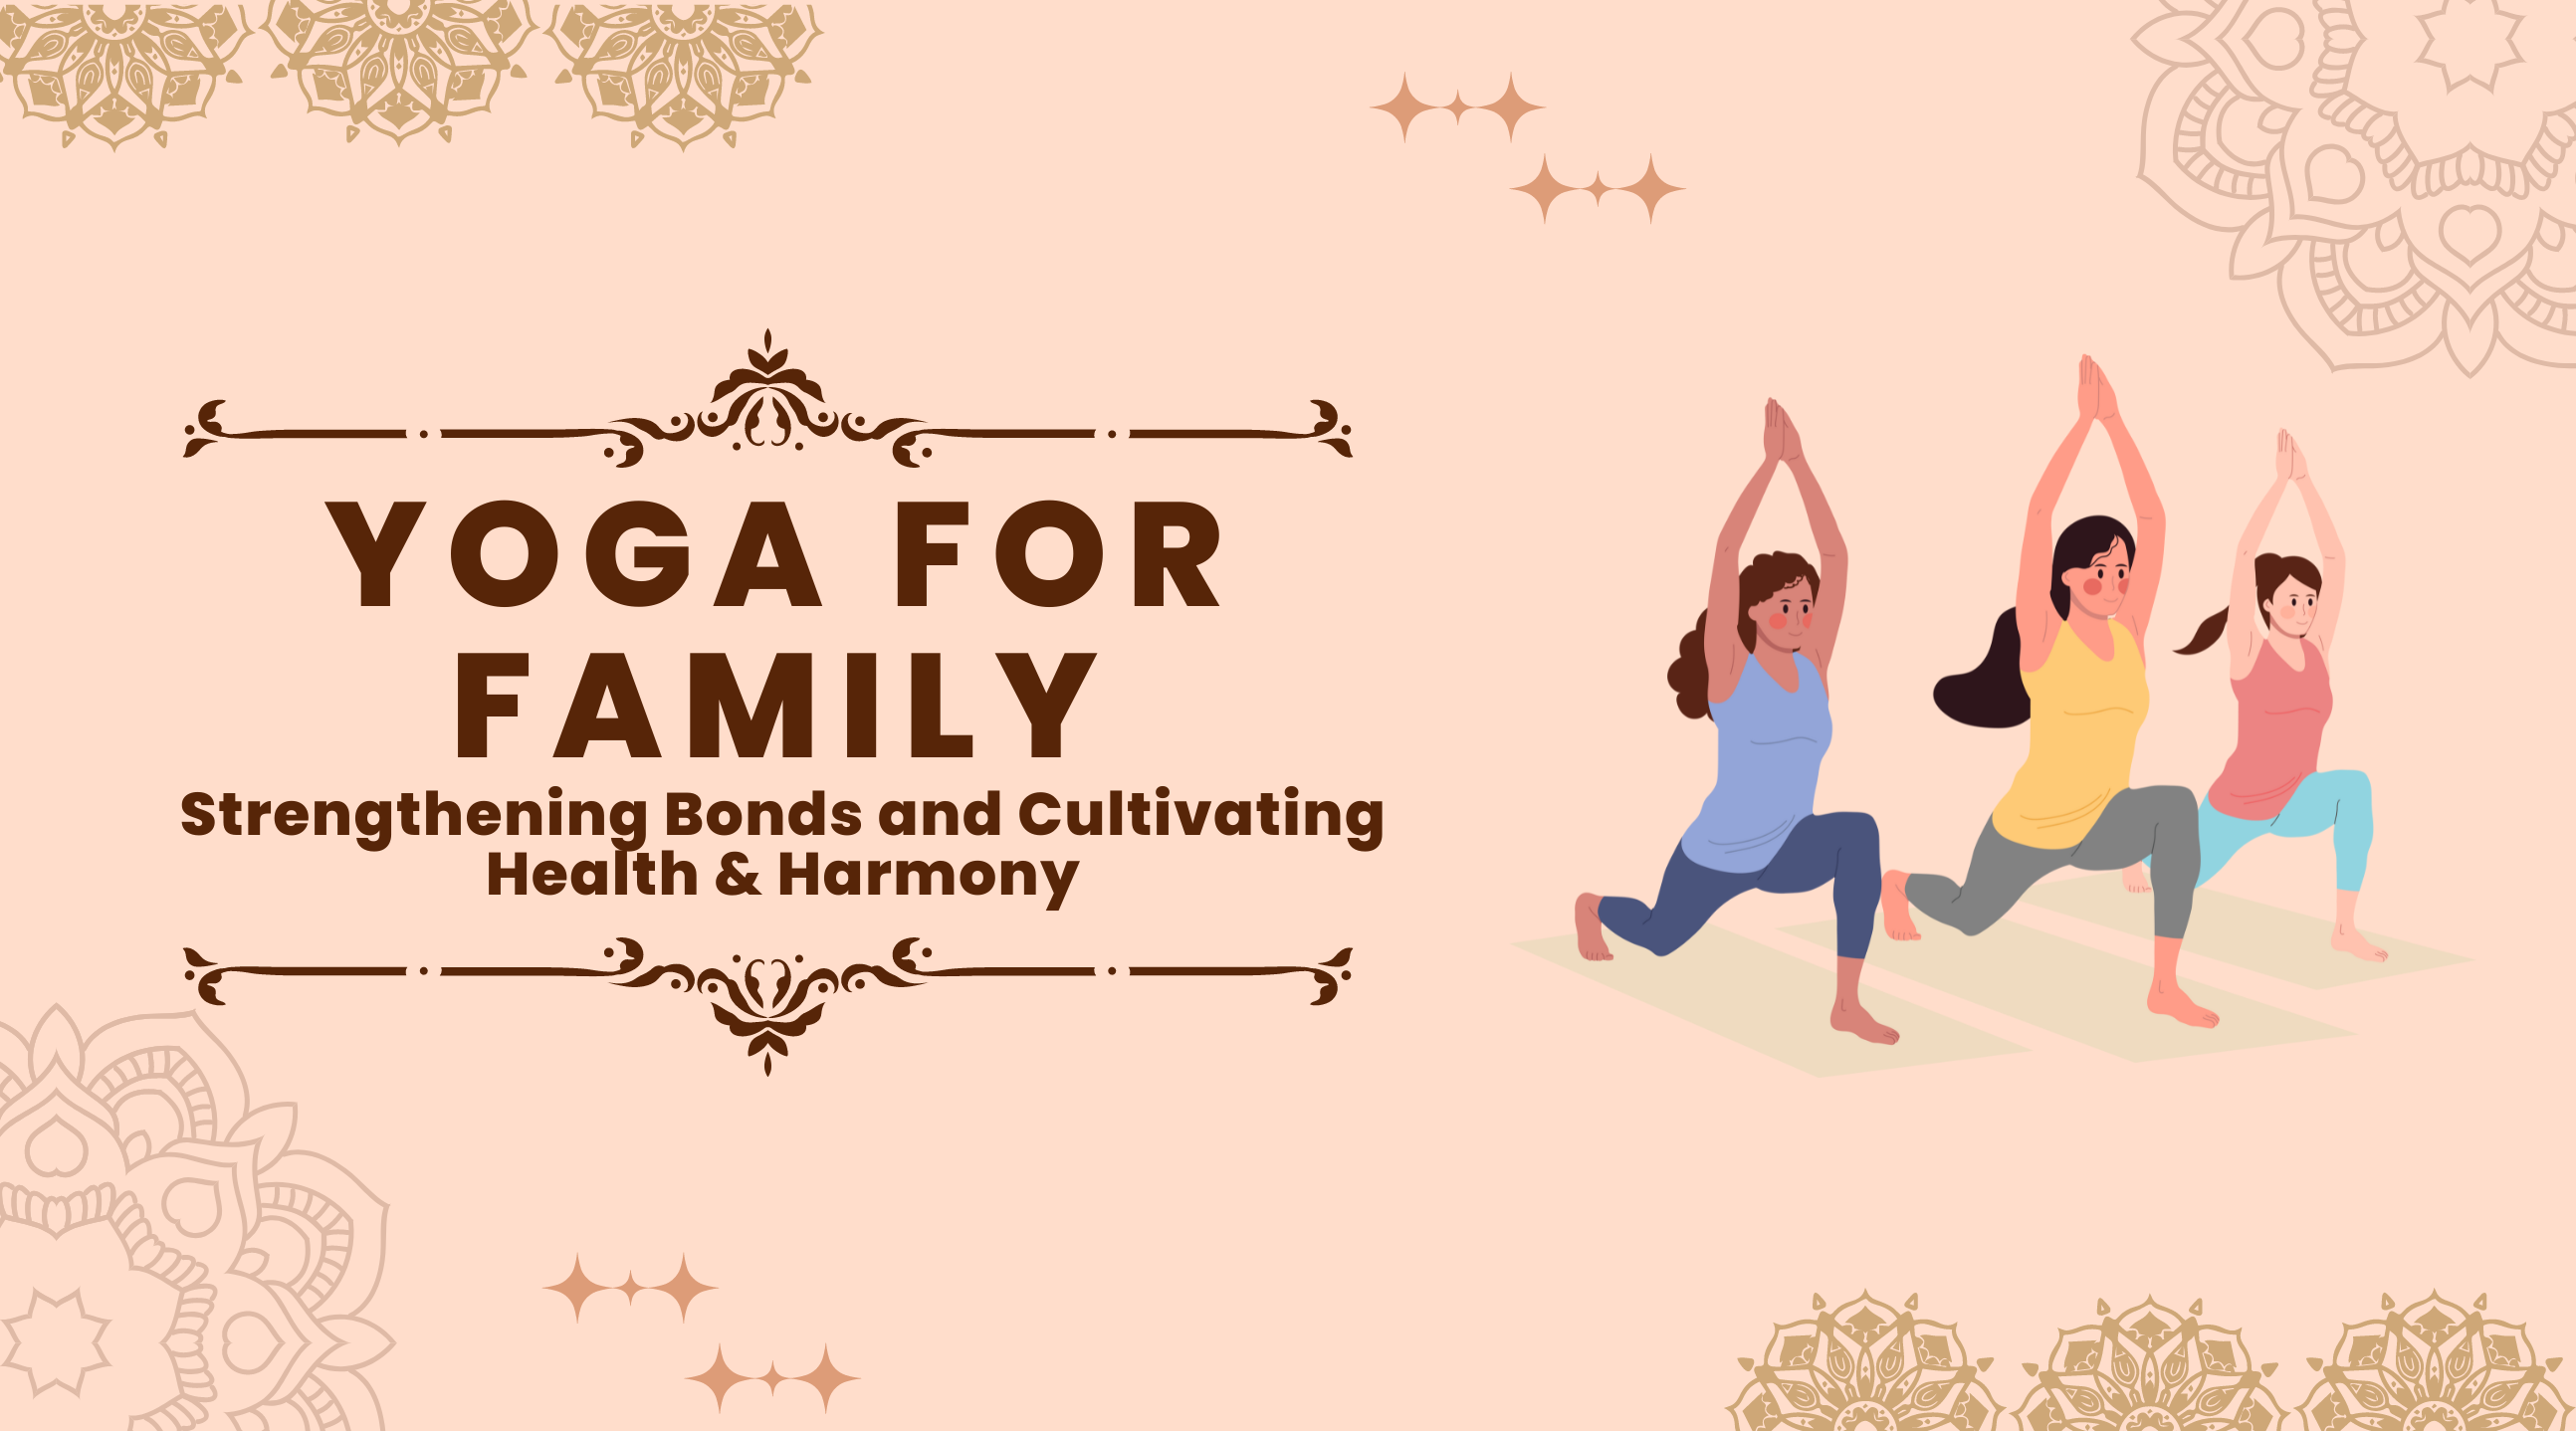 Yoga For Family: Strengthening Bonds and Cultivating Health & Harmony